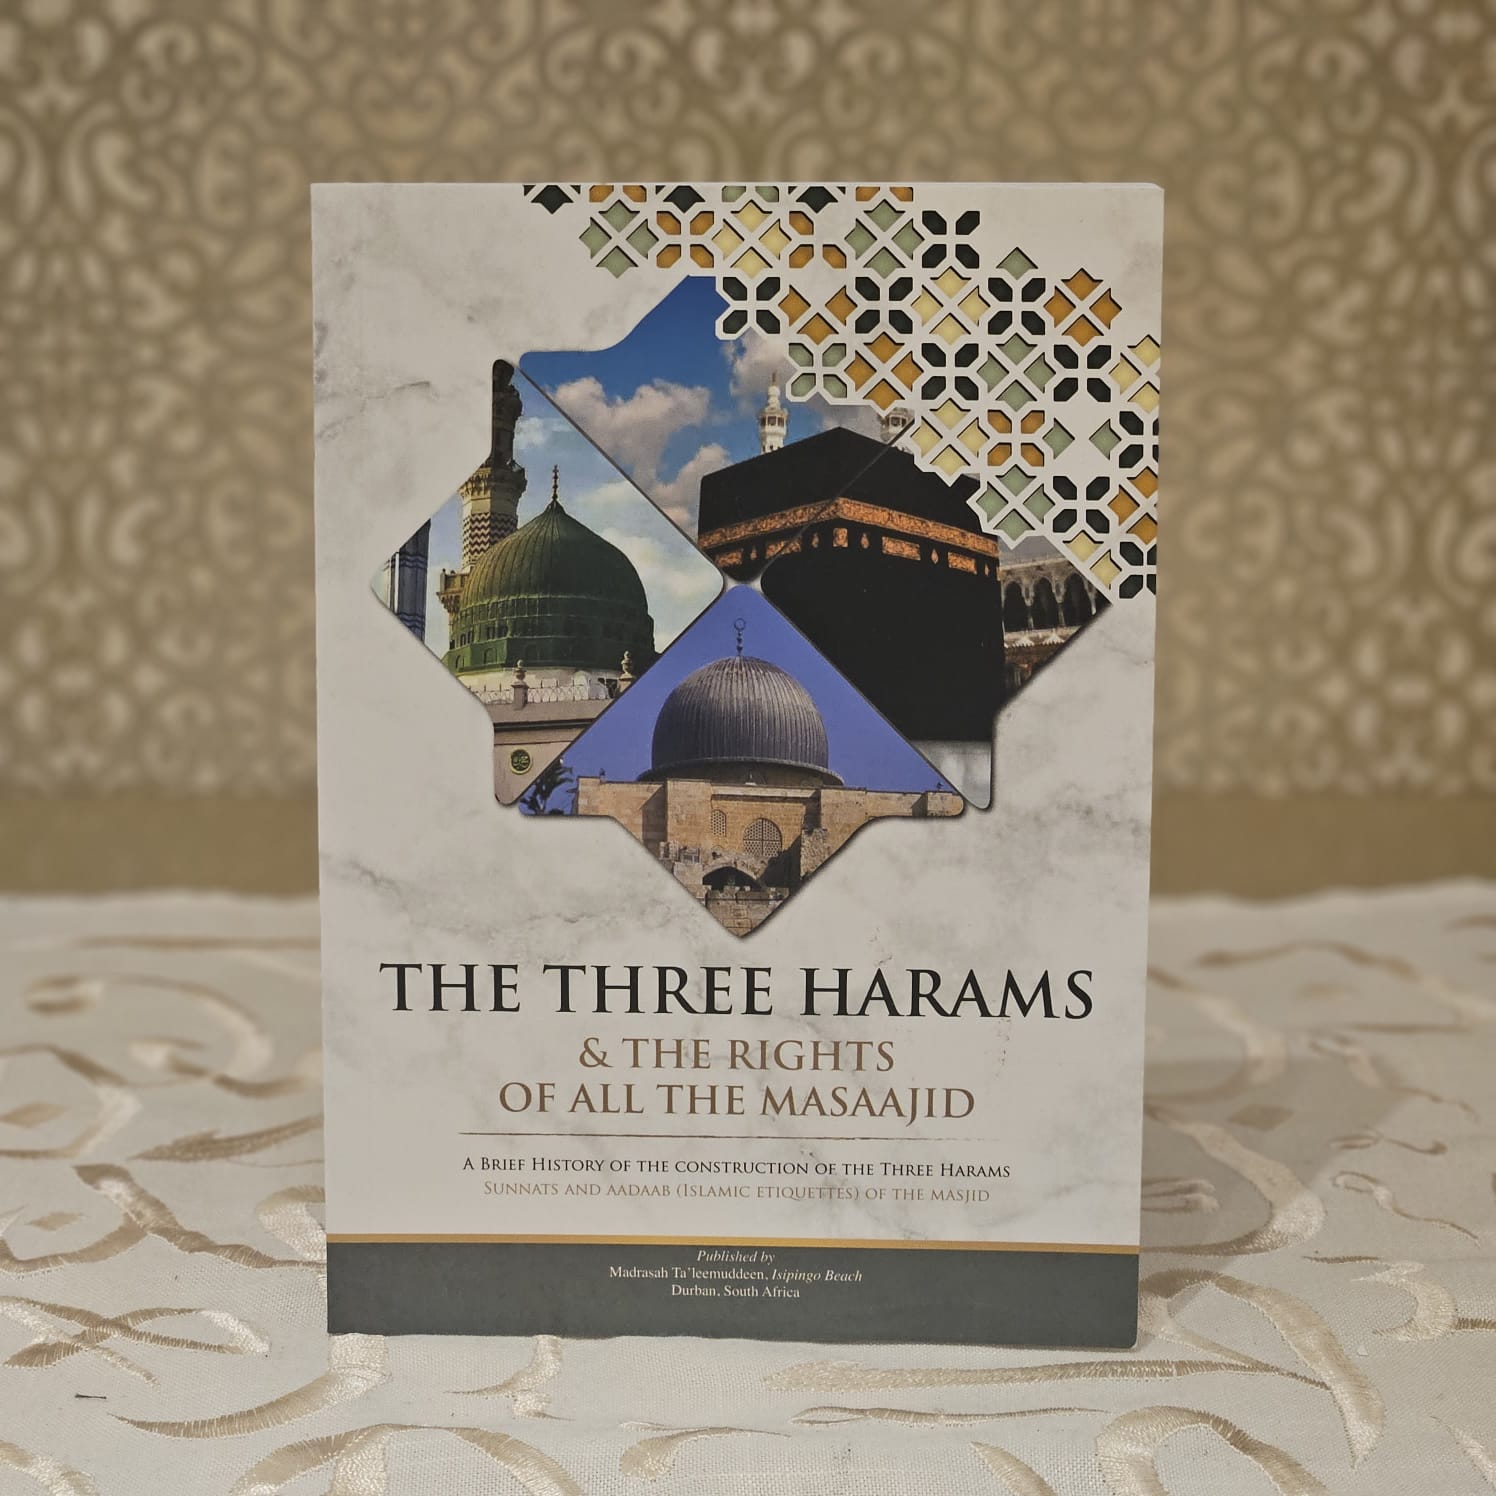 The Three Harms & the Rights of All the Masaajid